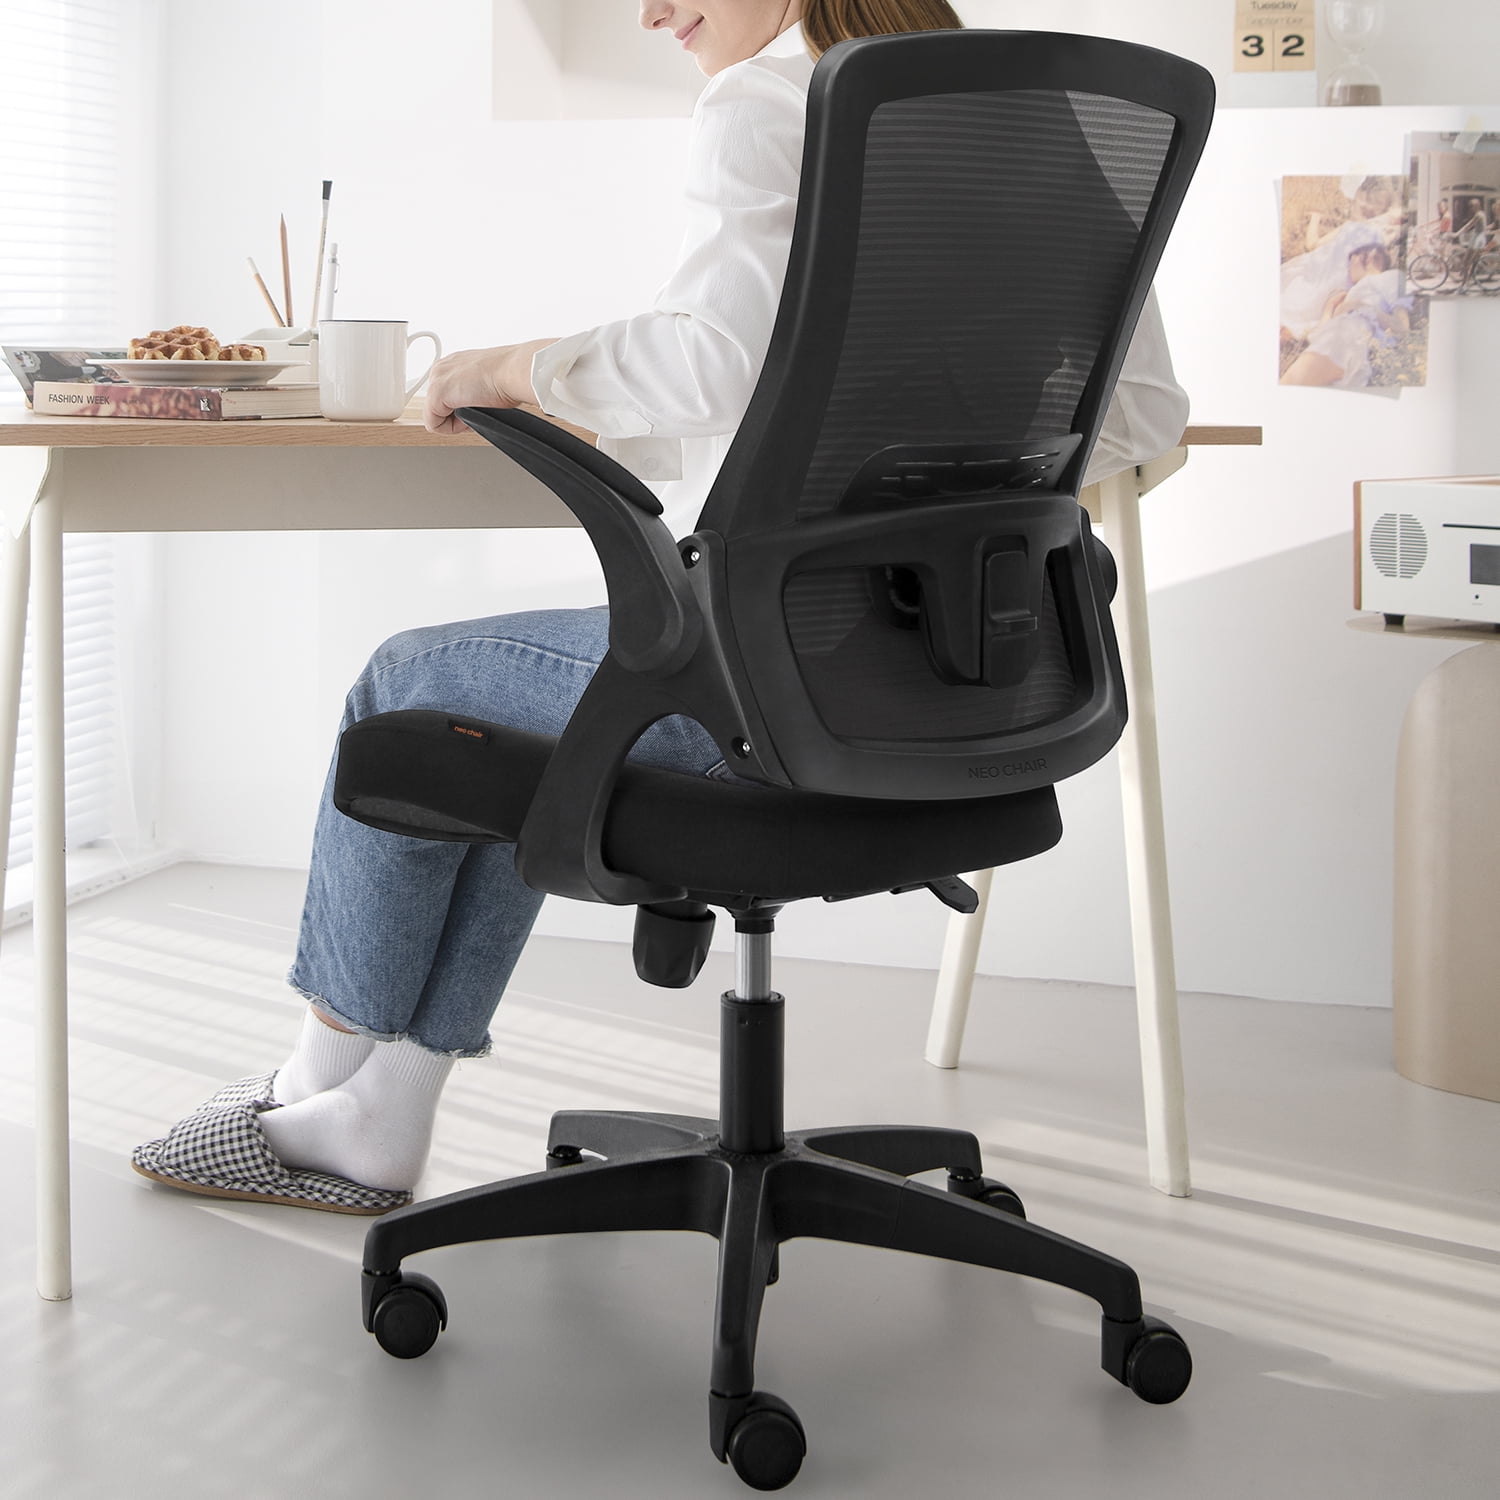 Neo Chair Ergonomic High Back Office Chair with Flip-up Arms